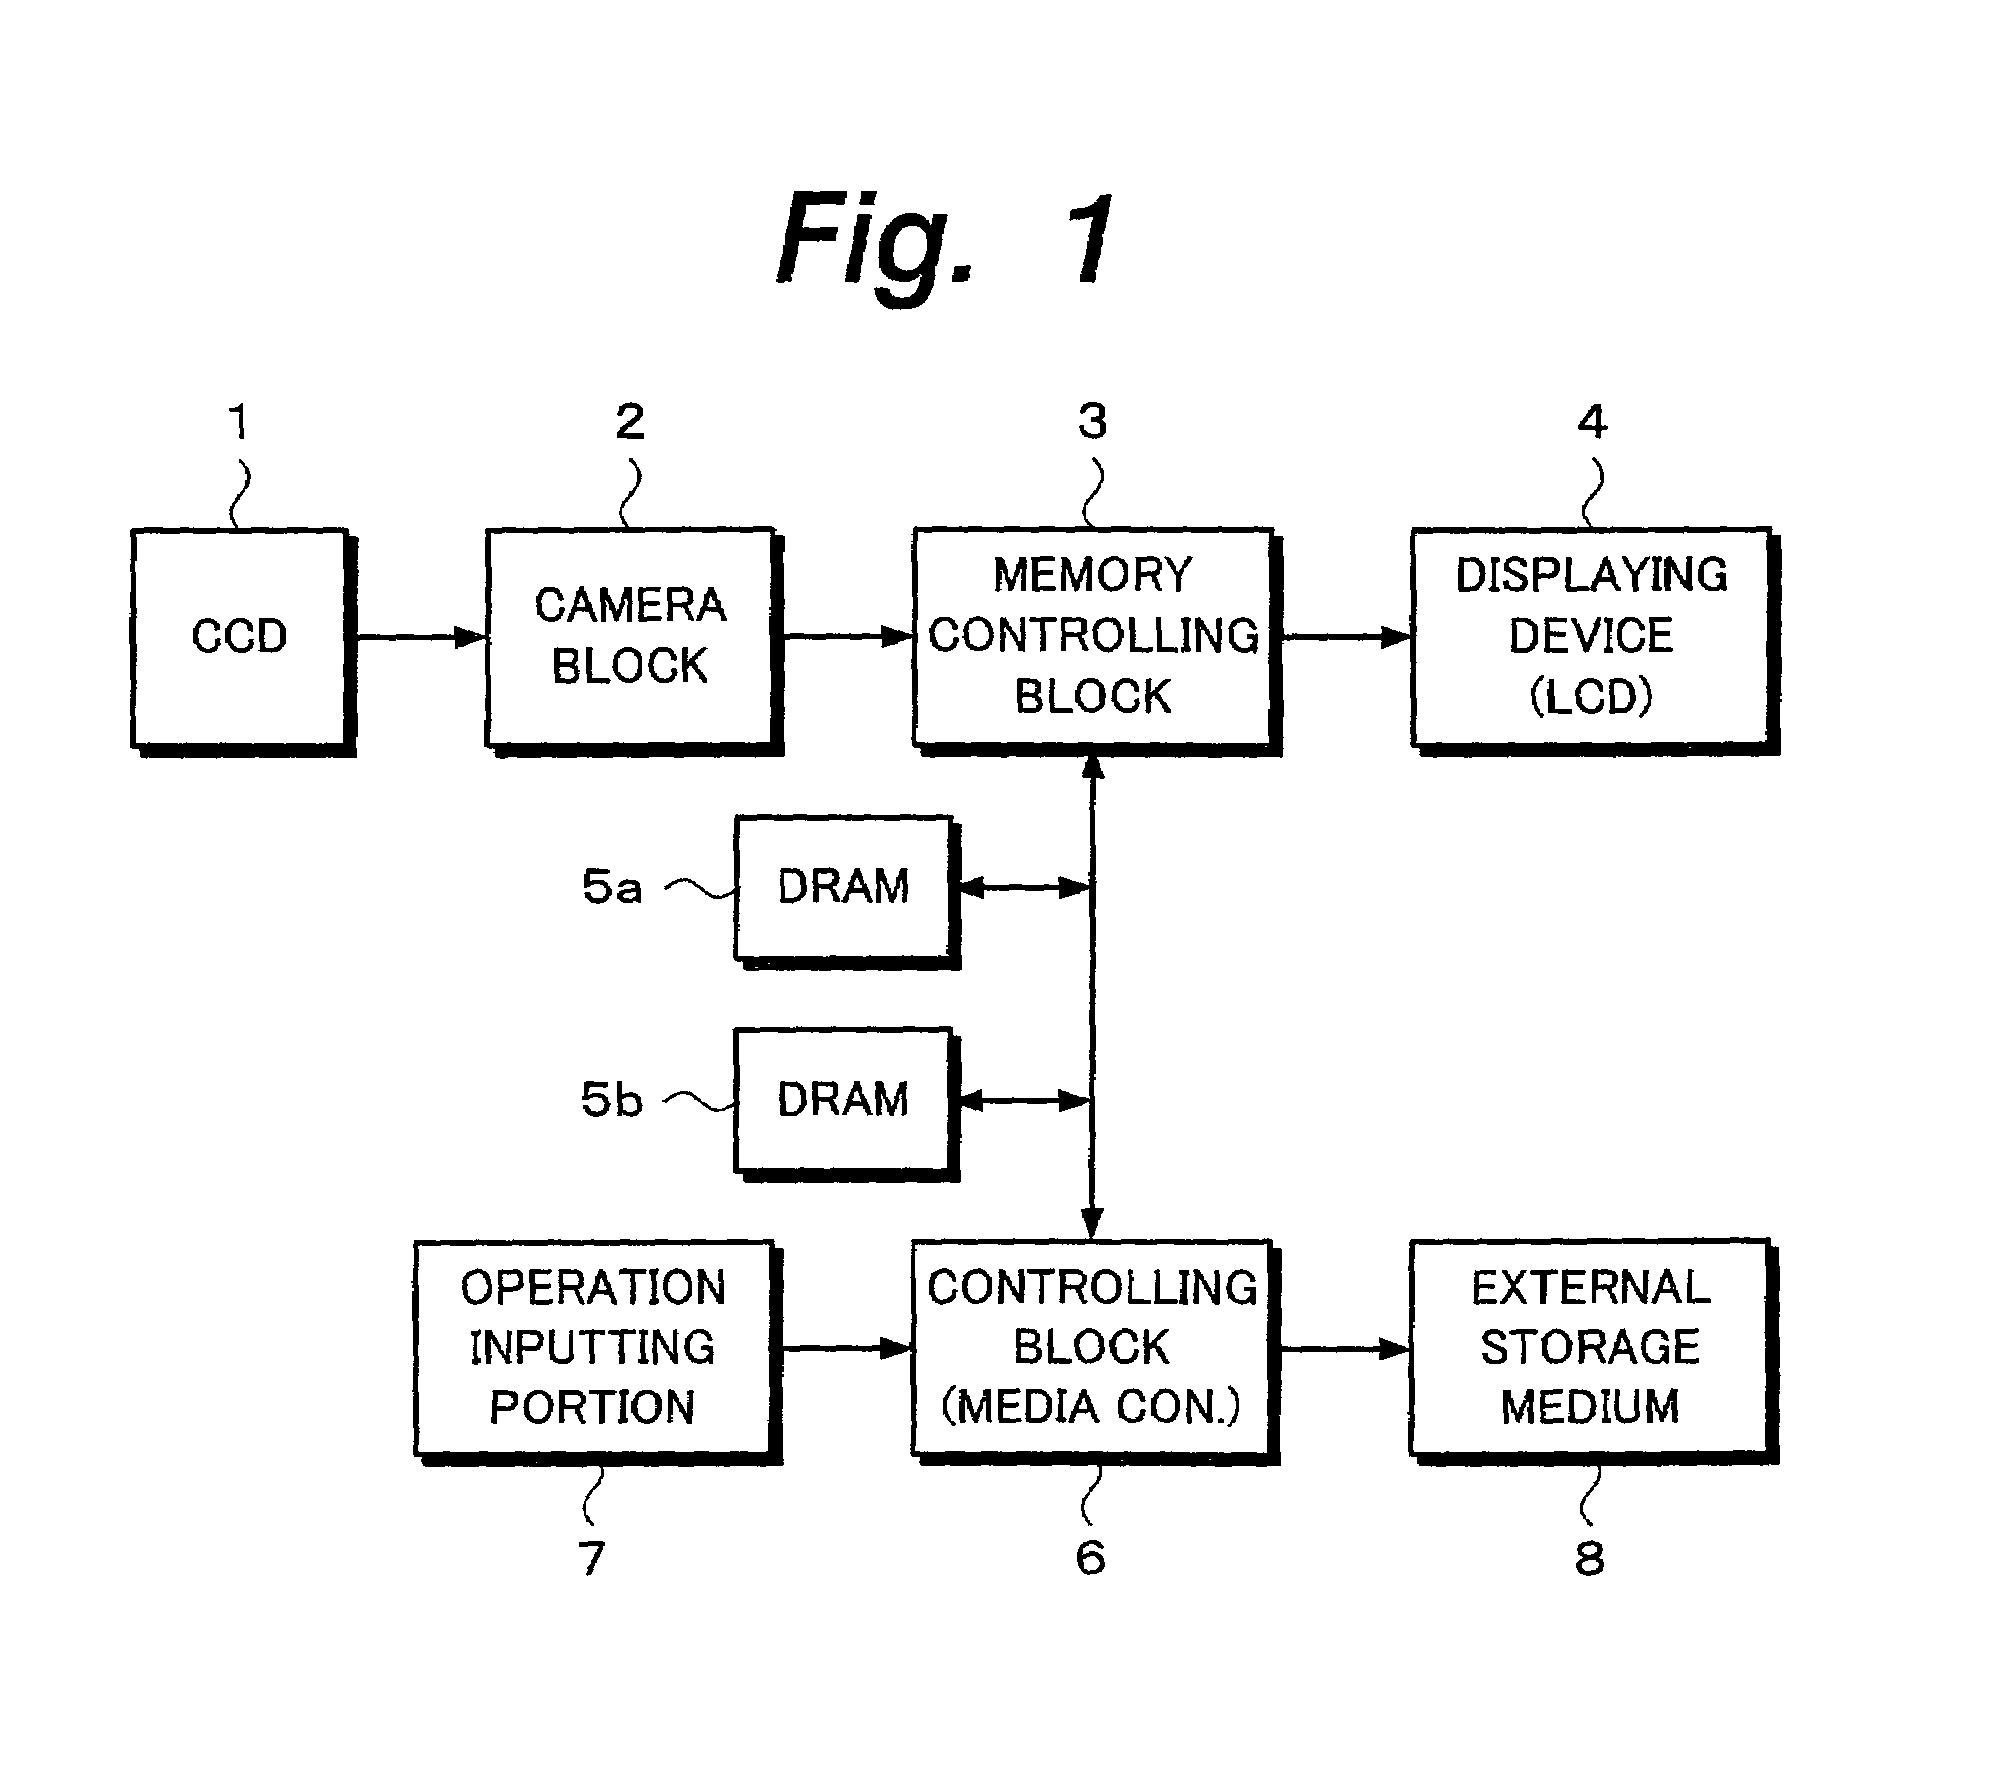 Photographing apparatus and signal processing method that allow data of still pictures to be converted into a moving picture file